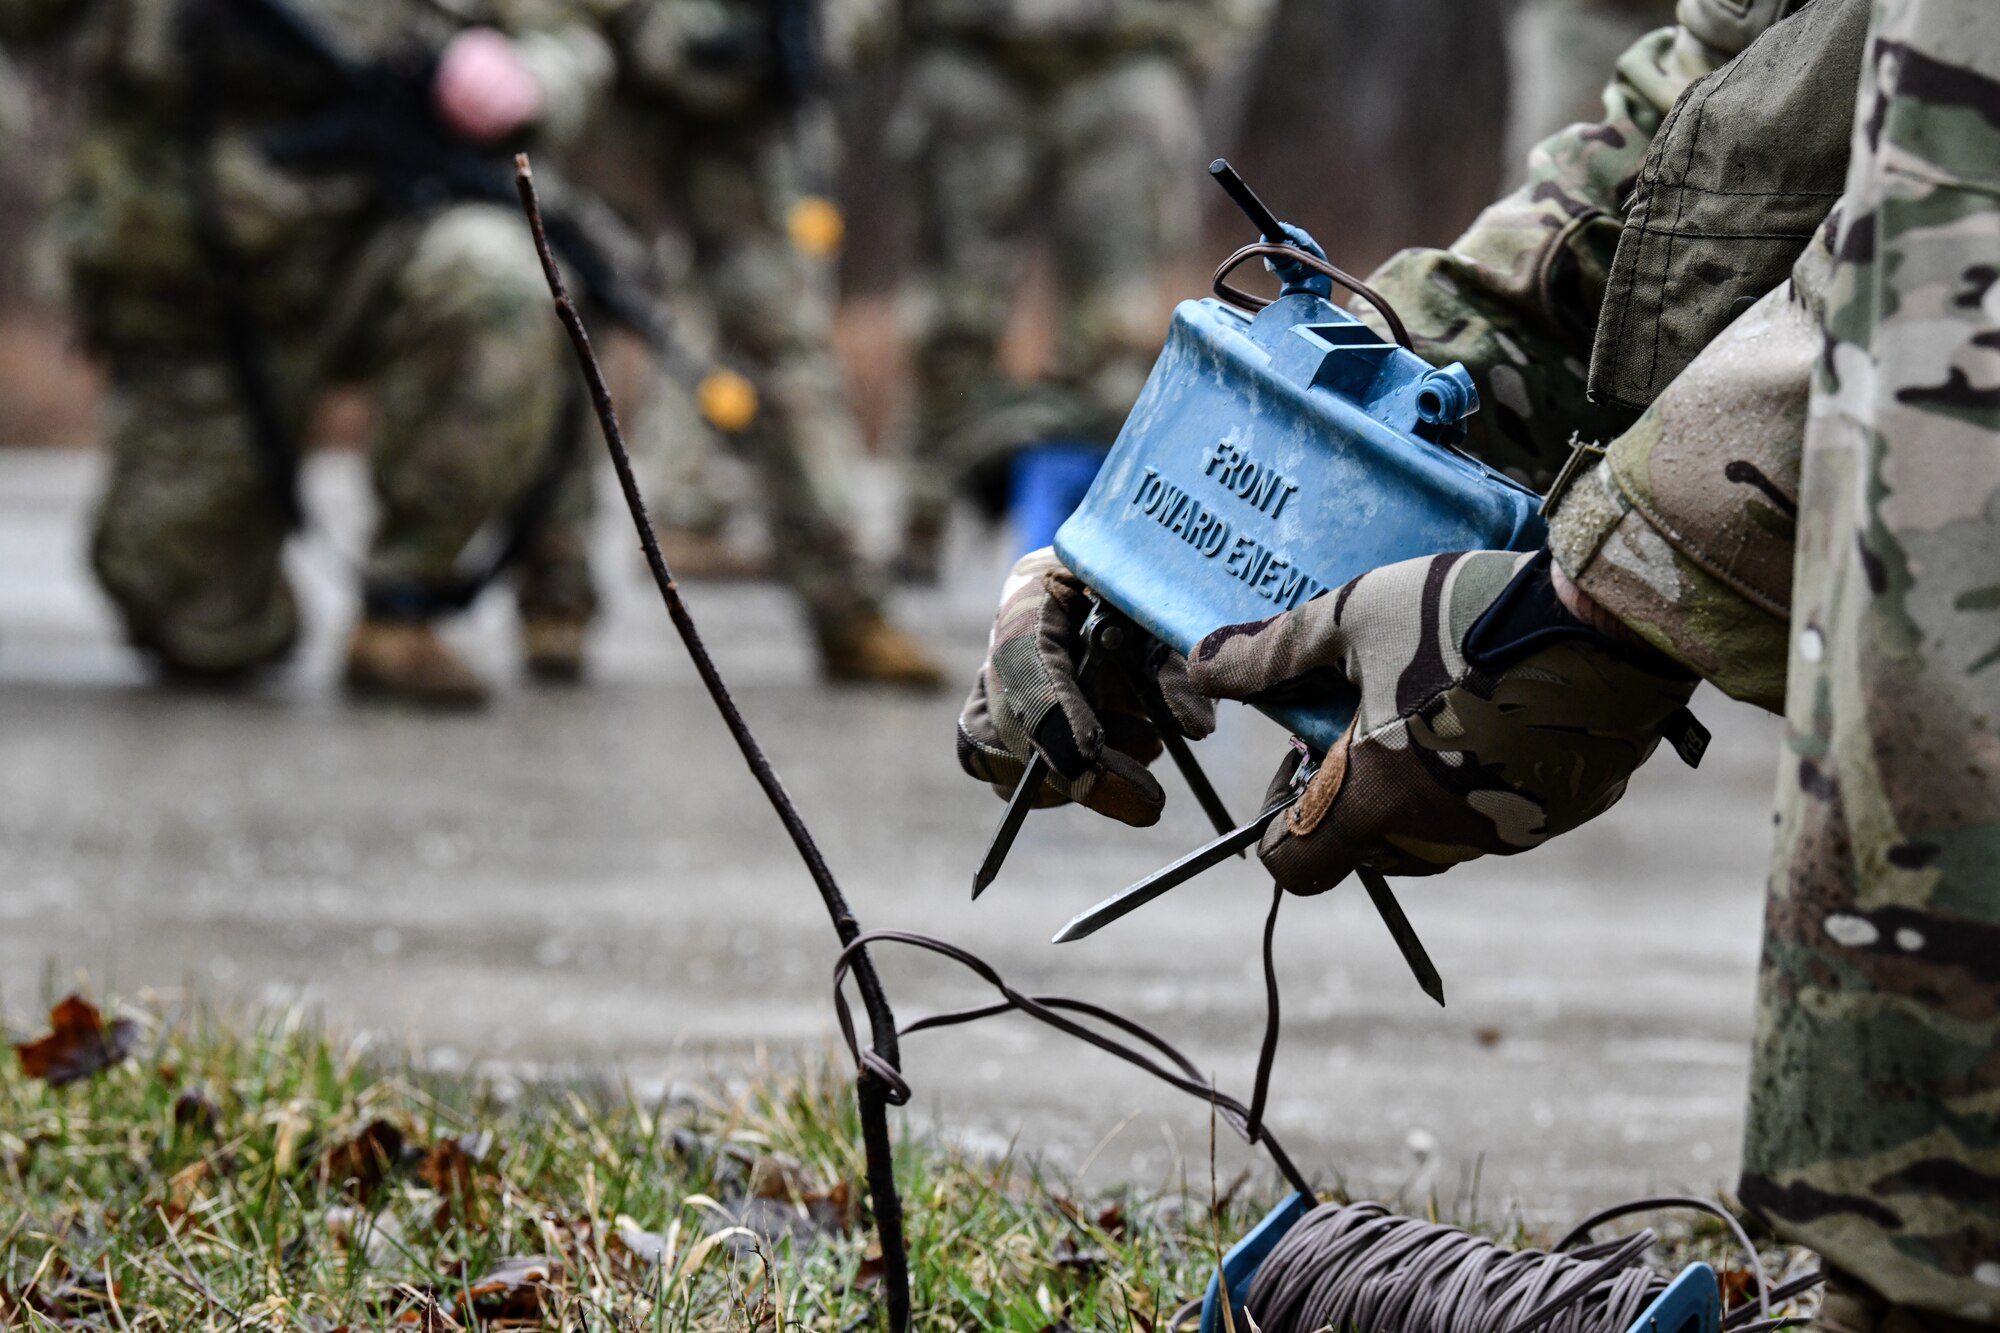 Senior Master Sgt. Jason Knepper, Air Force Reserve Command security forces training manager, demonstrates how to rig a claymore on March 17, 2023, at Camp James A. Garfield Joint Military Training Center, Ohio.